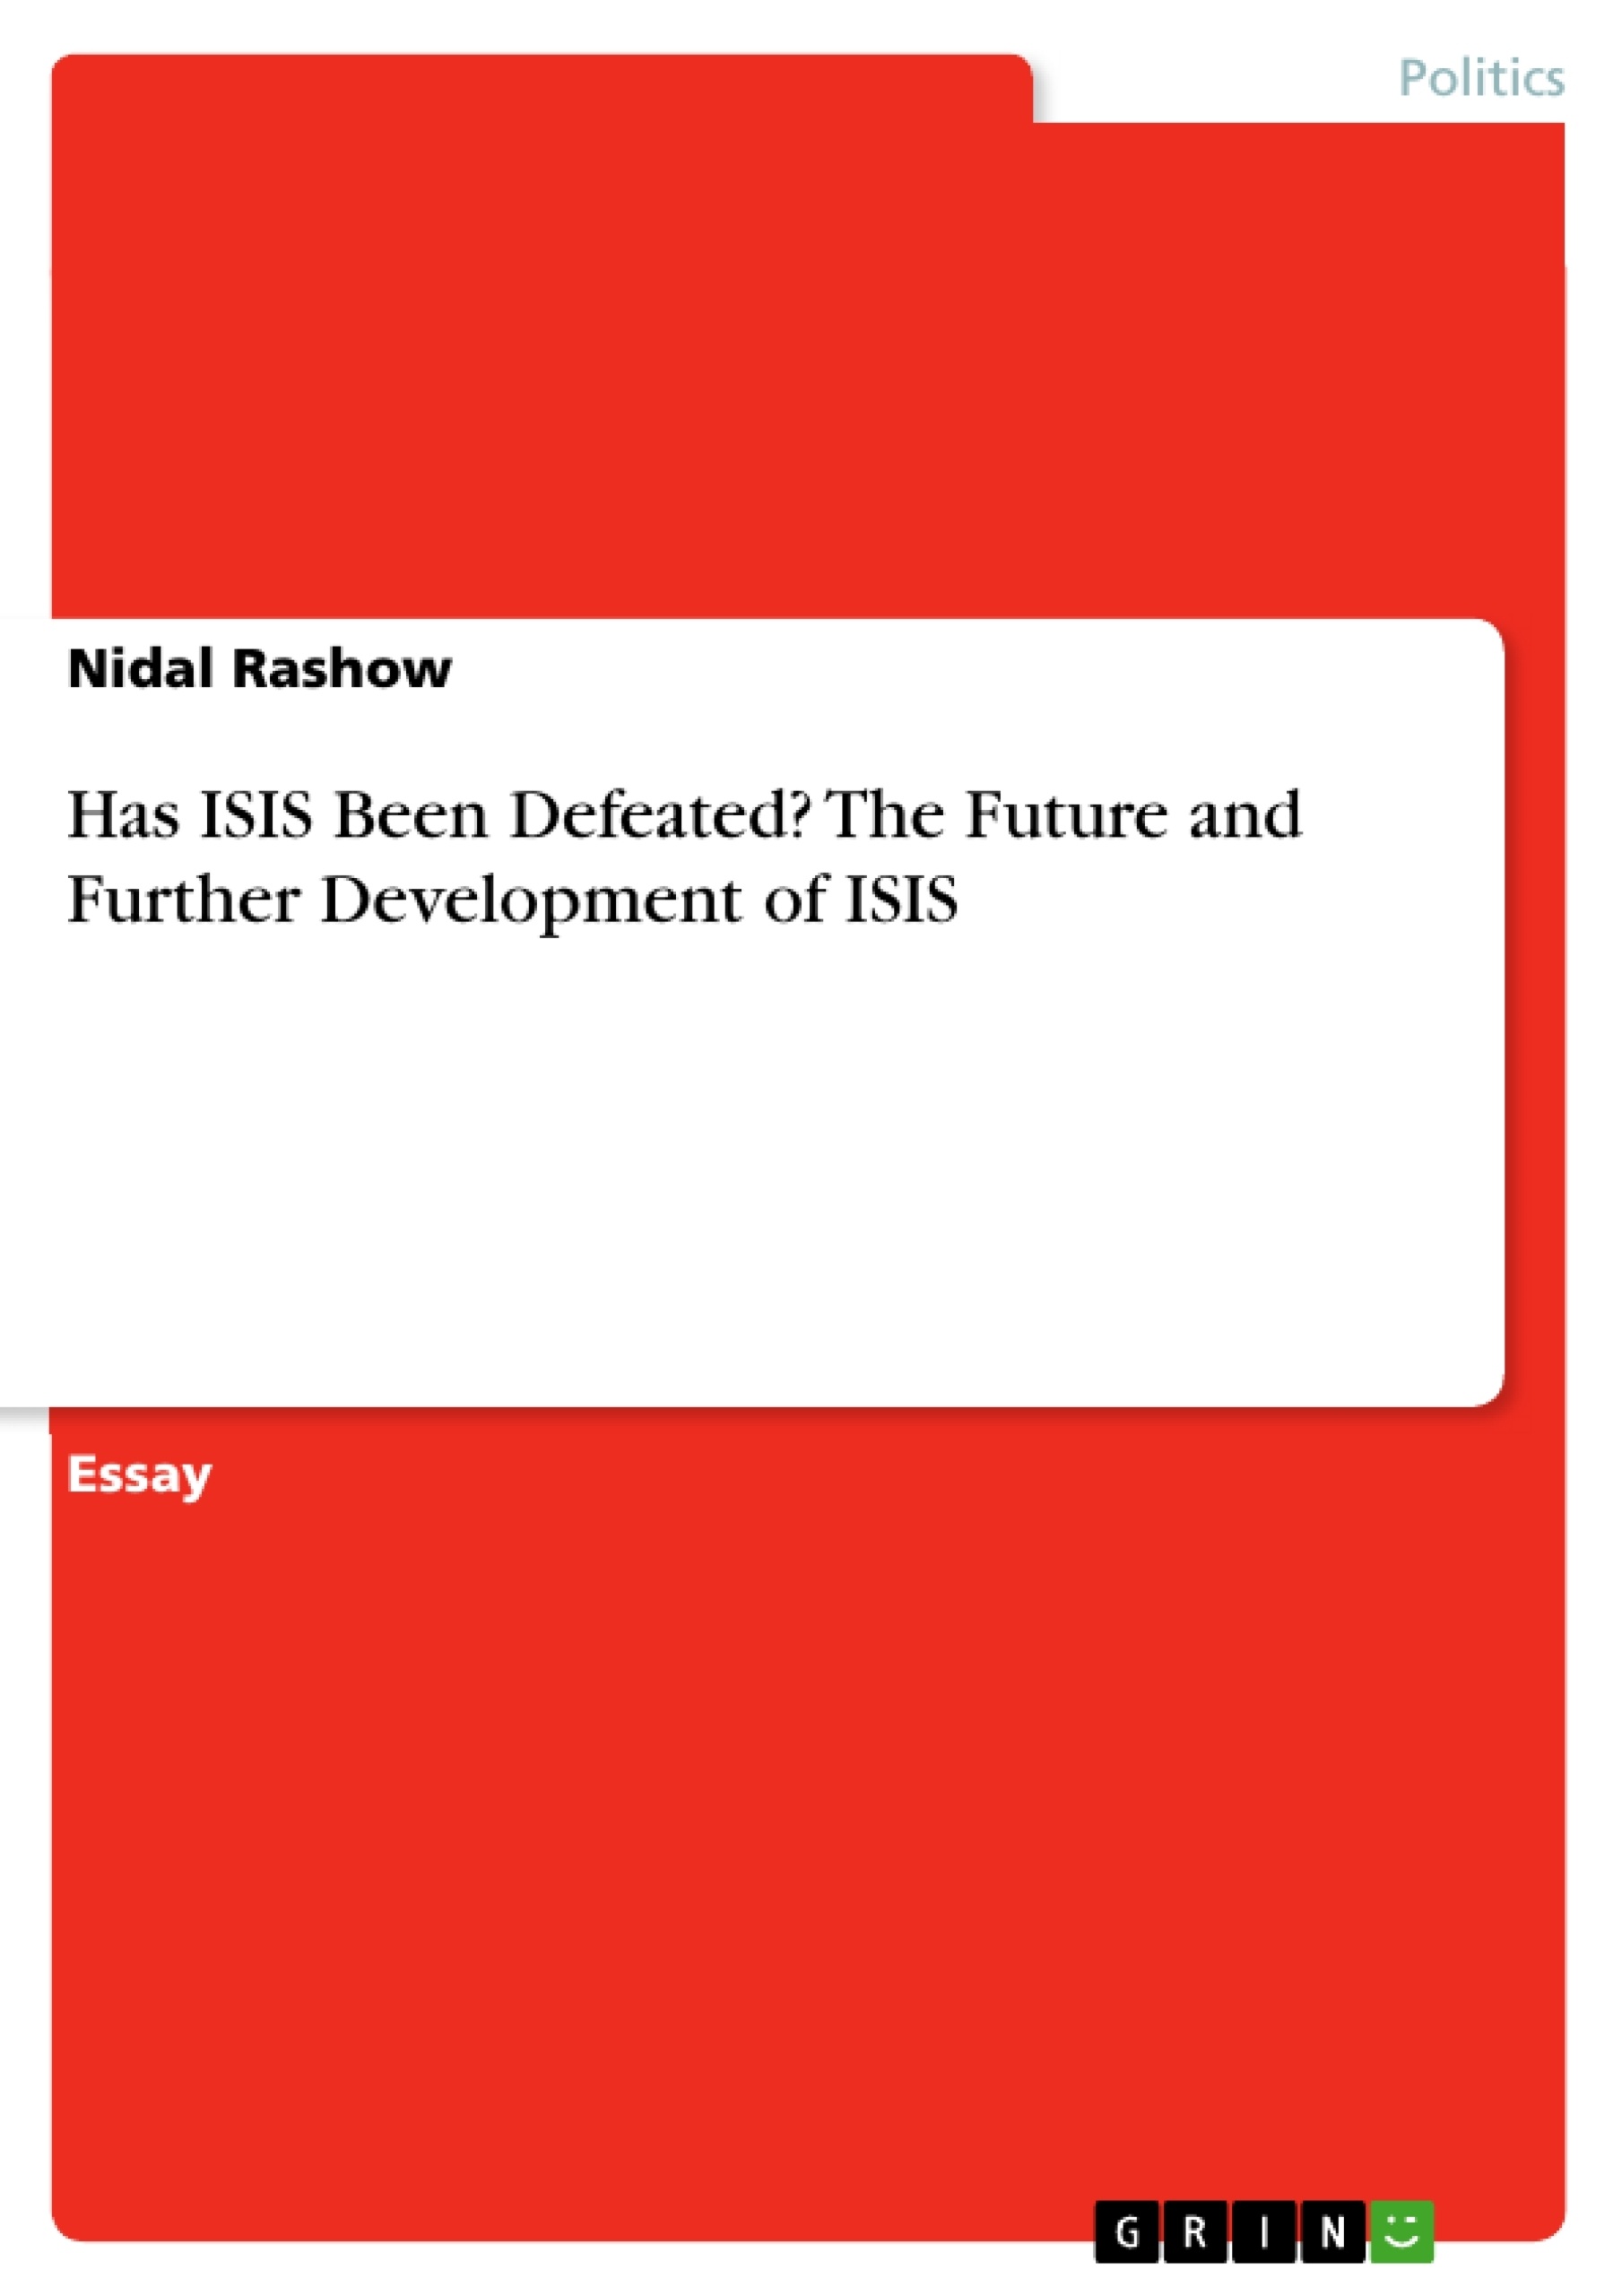 Title: Has ISIS Been Defeated? The Future and Further Development of ISIS